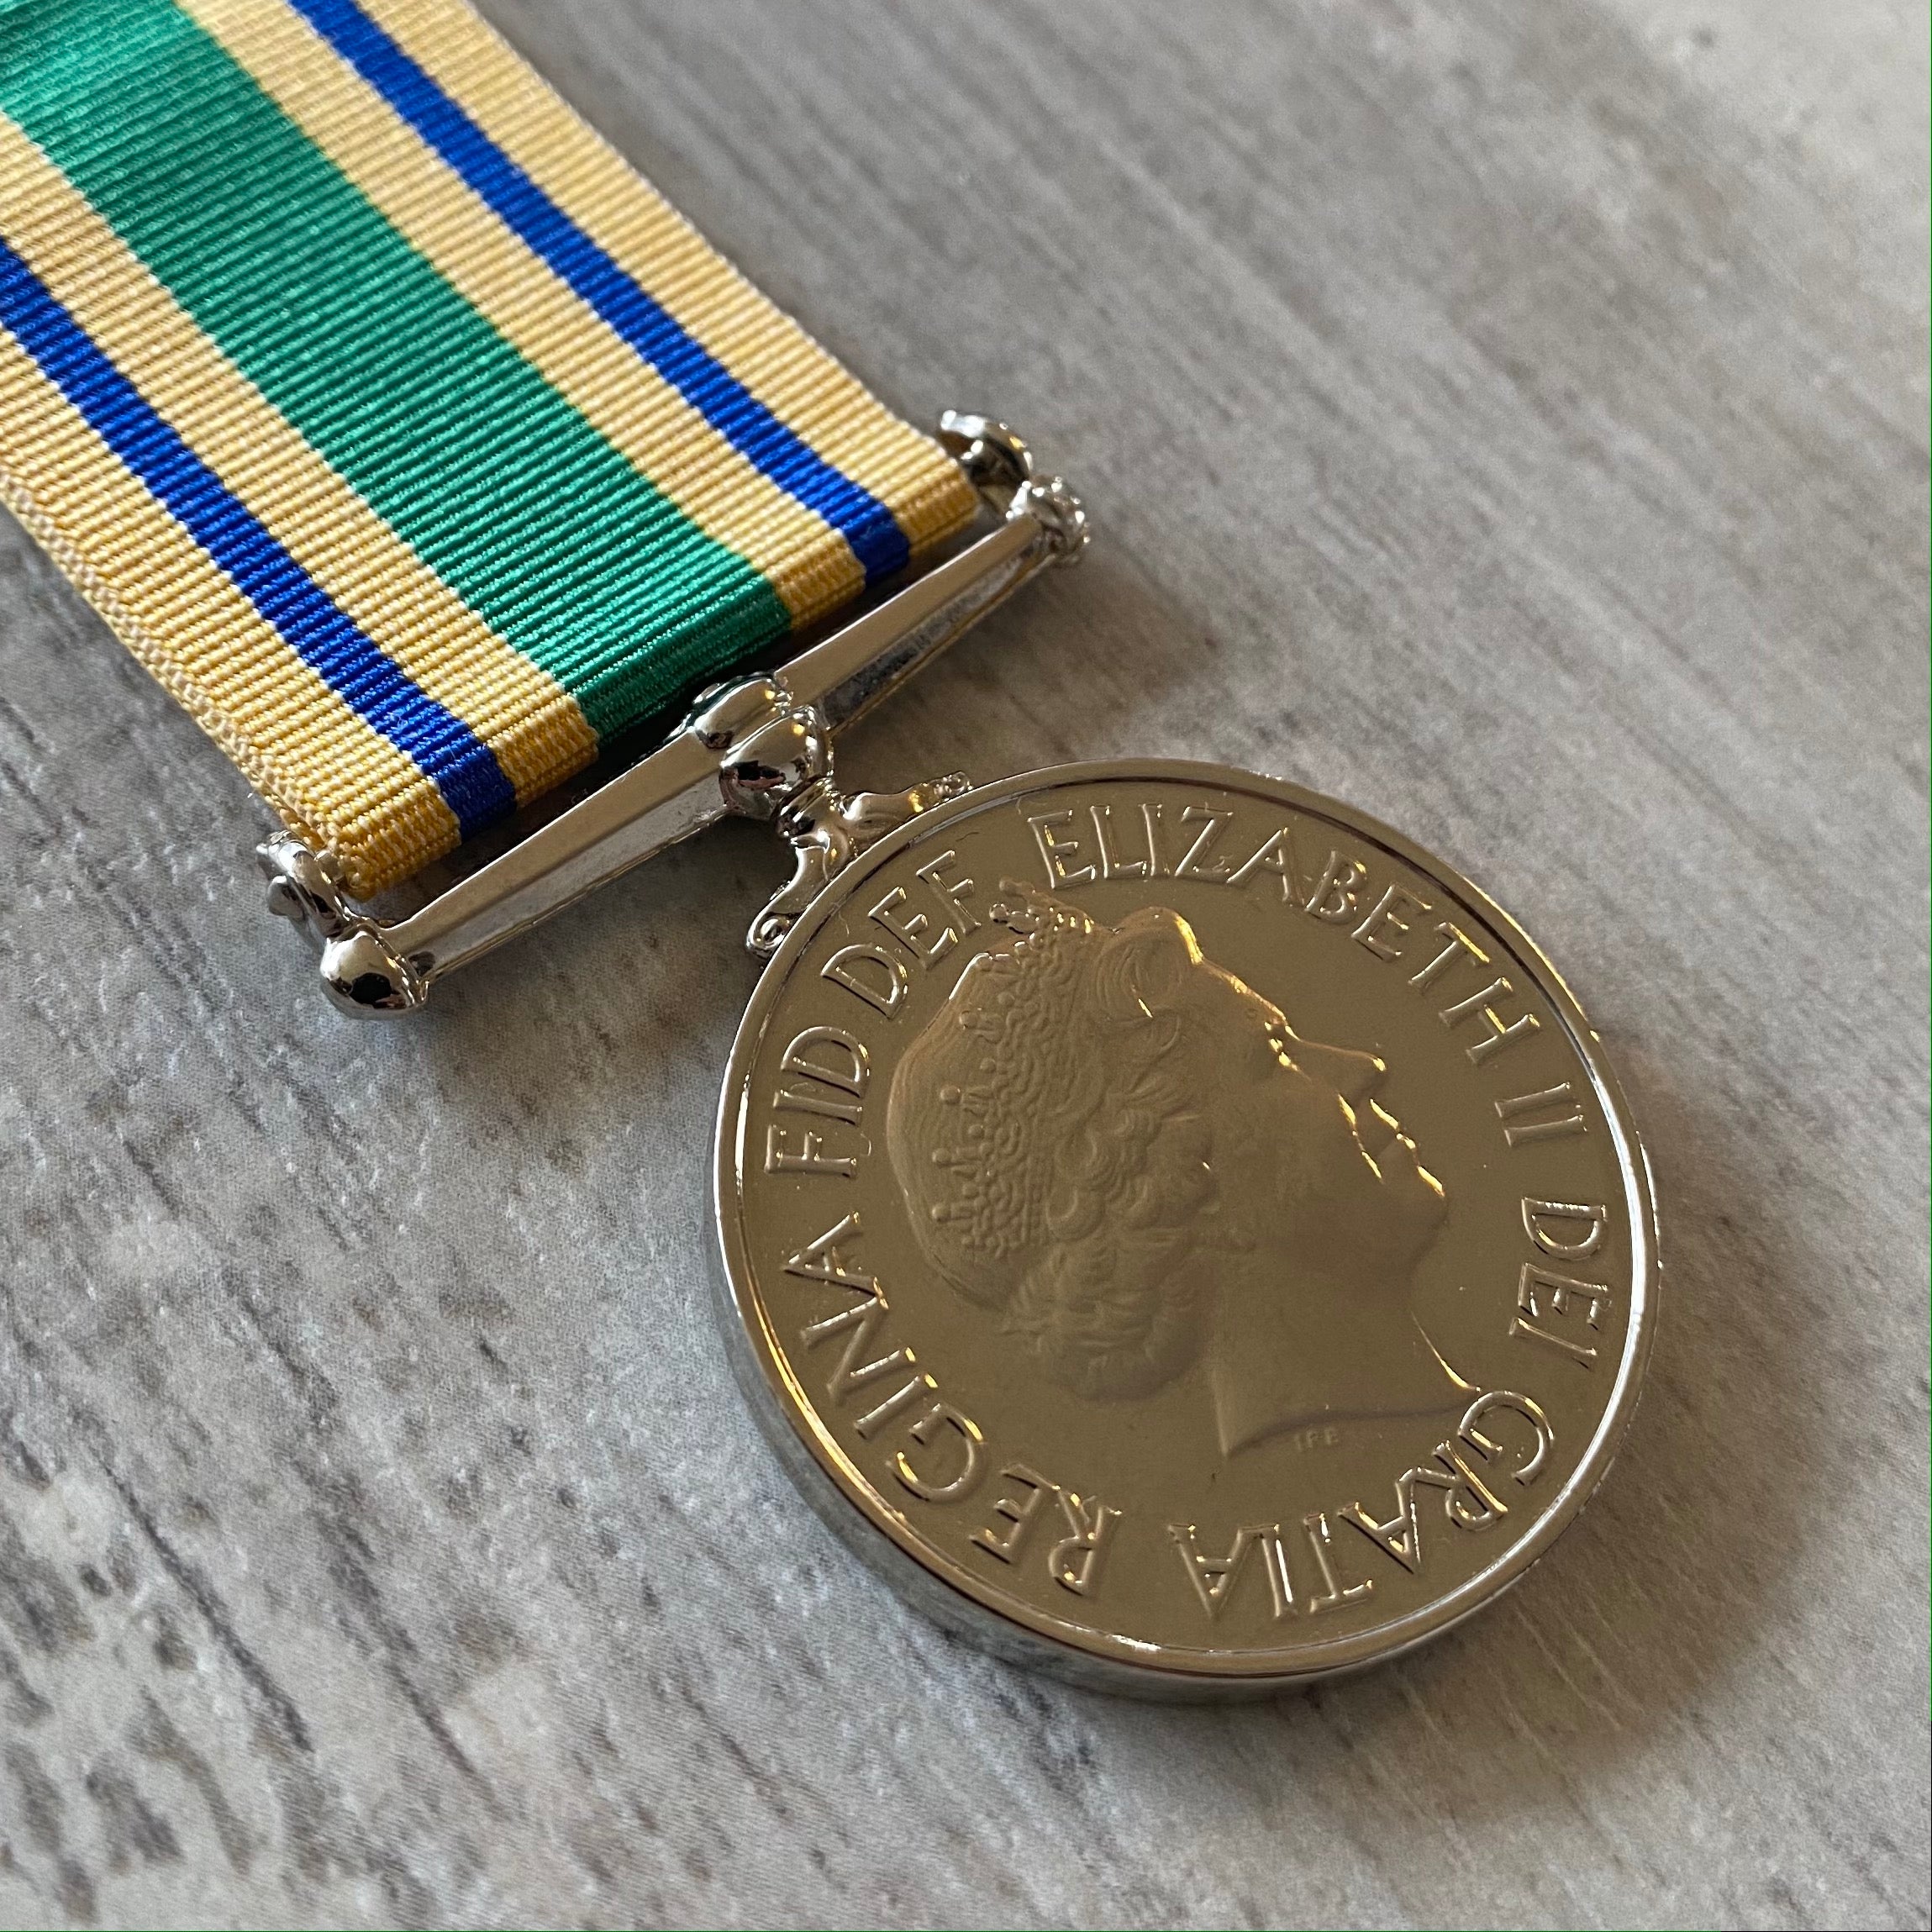 British Iraq Reconstruction Medal - Foxhole Medals